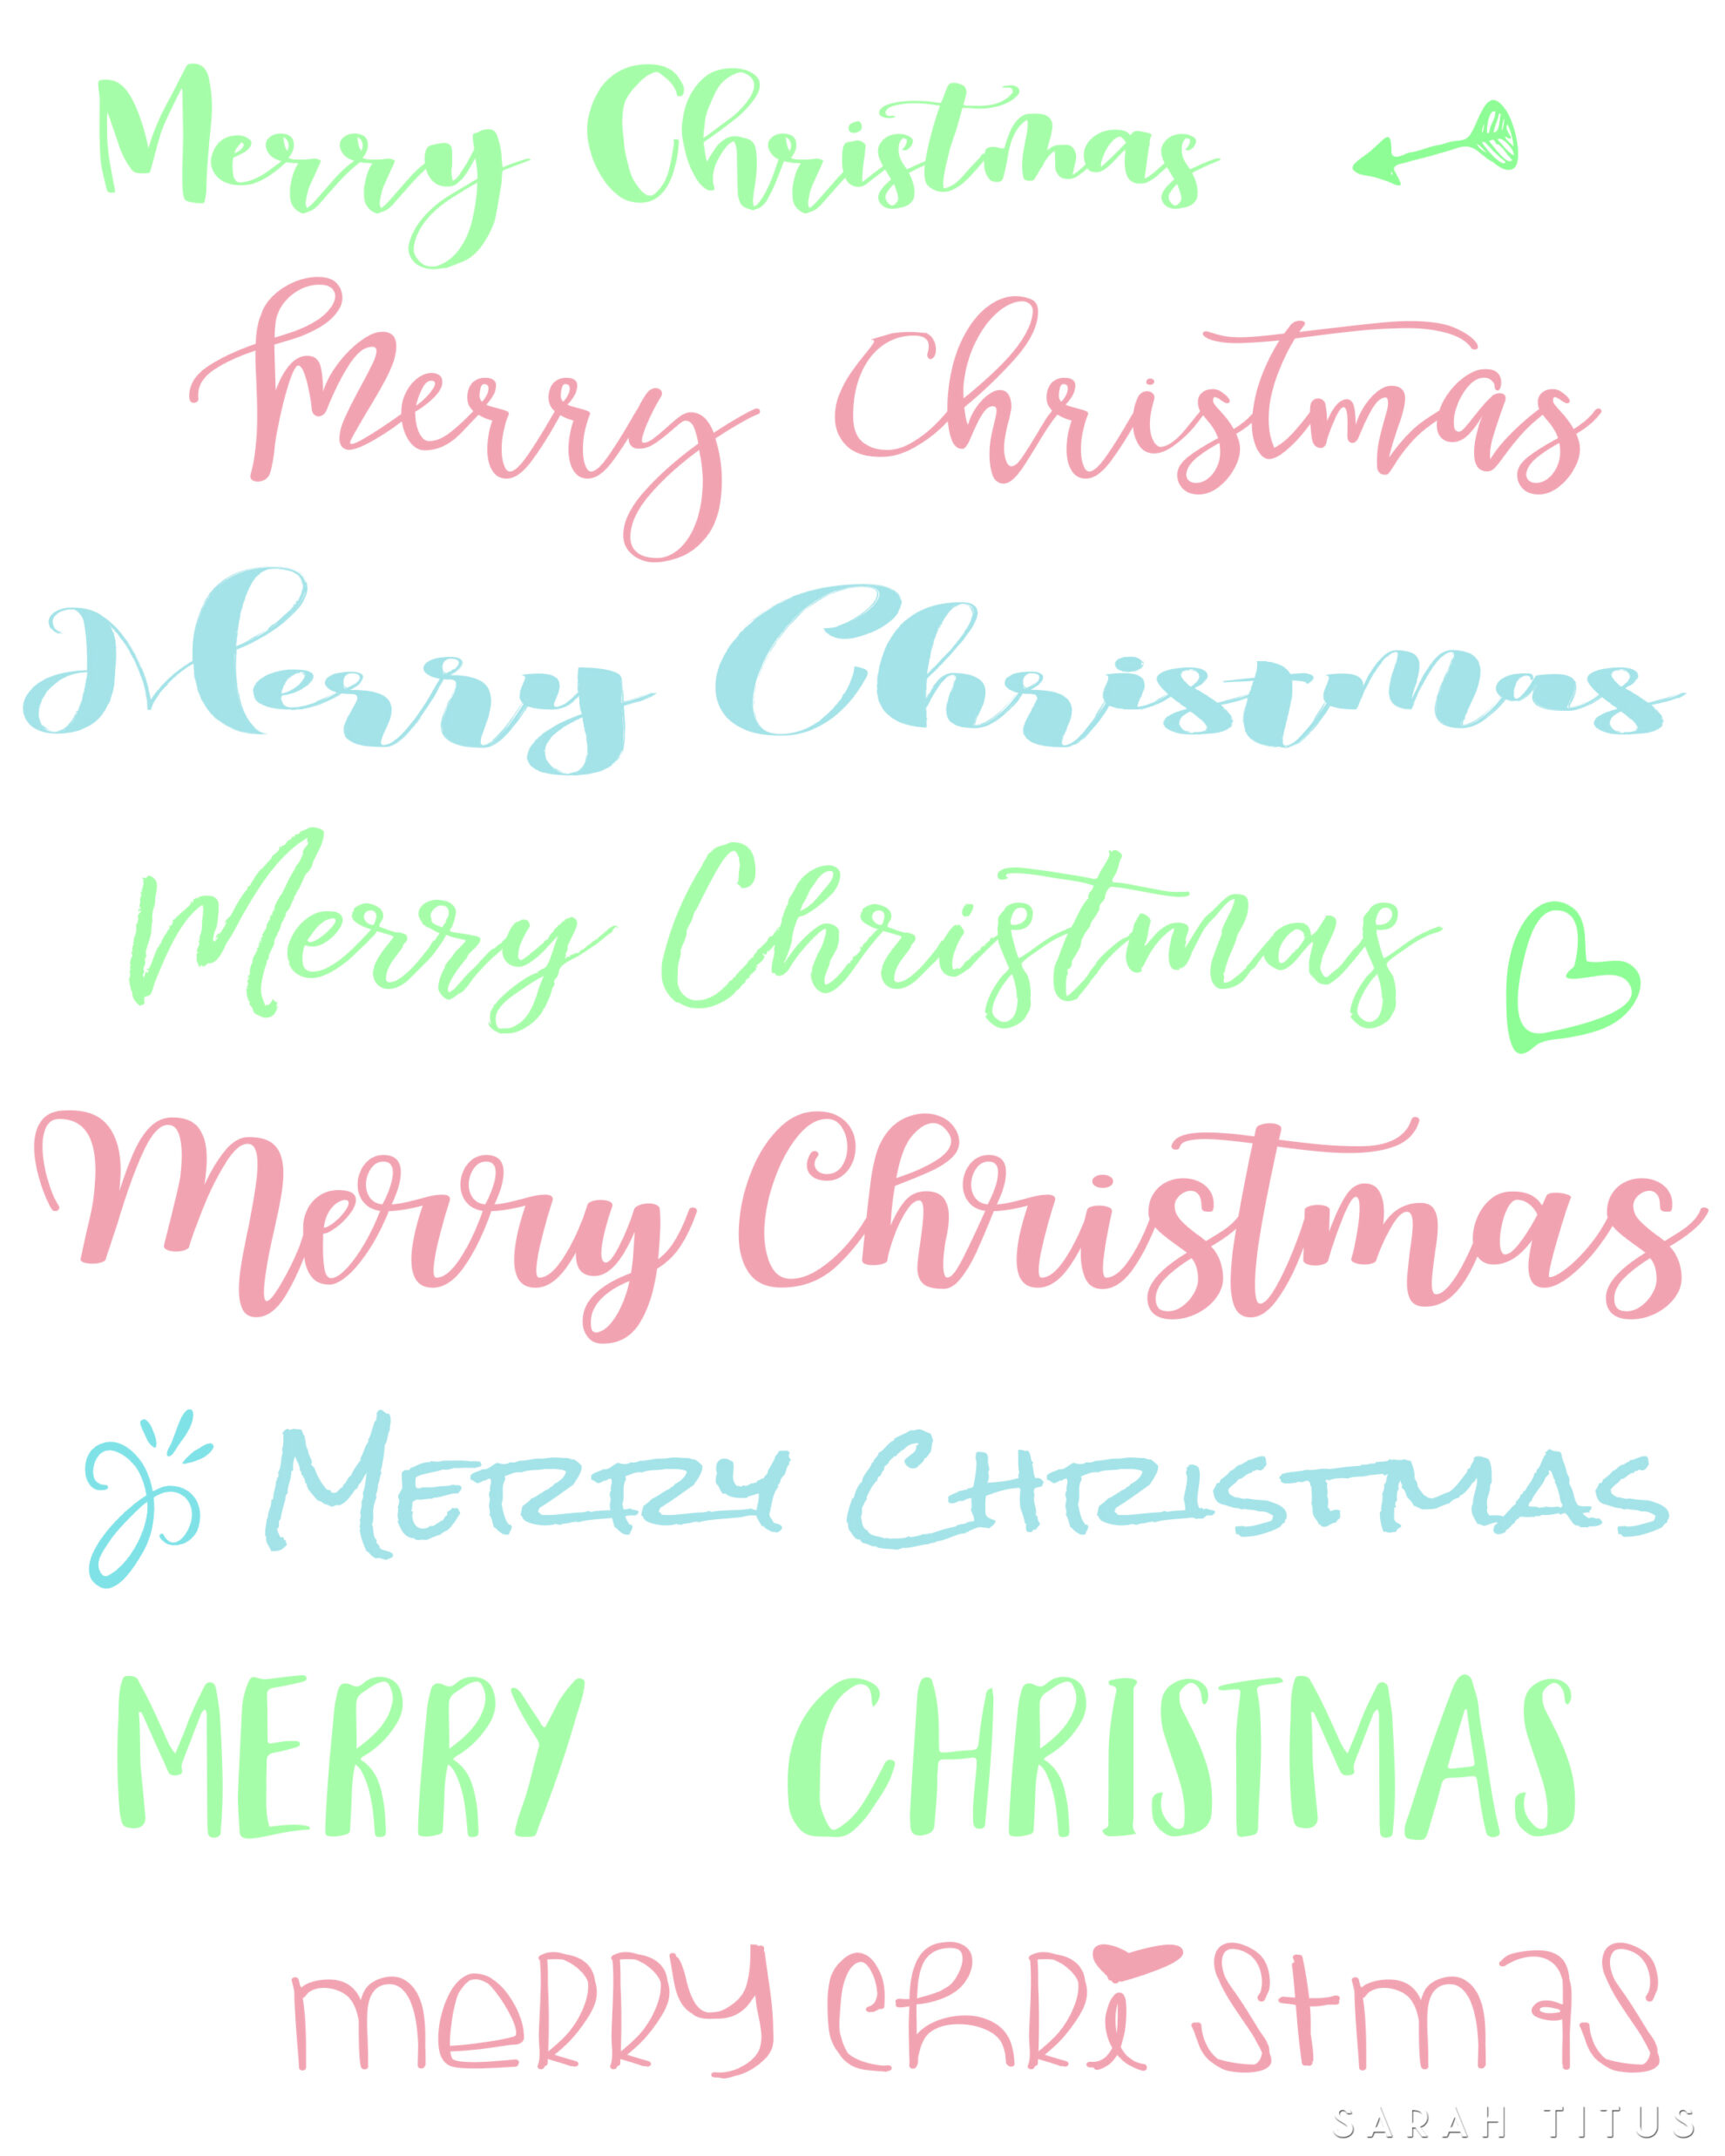 Do you love handlettering as much as I do? This Christmas handlettering printable is for you!